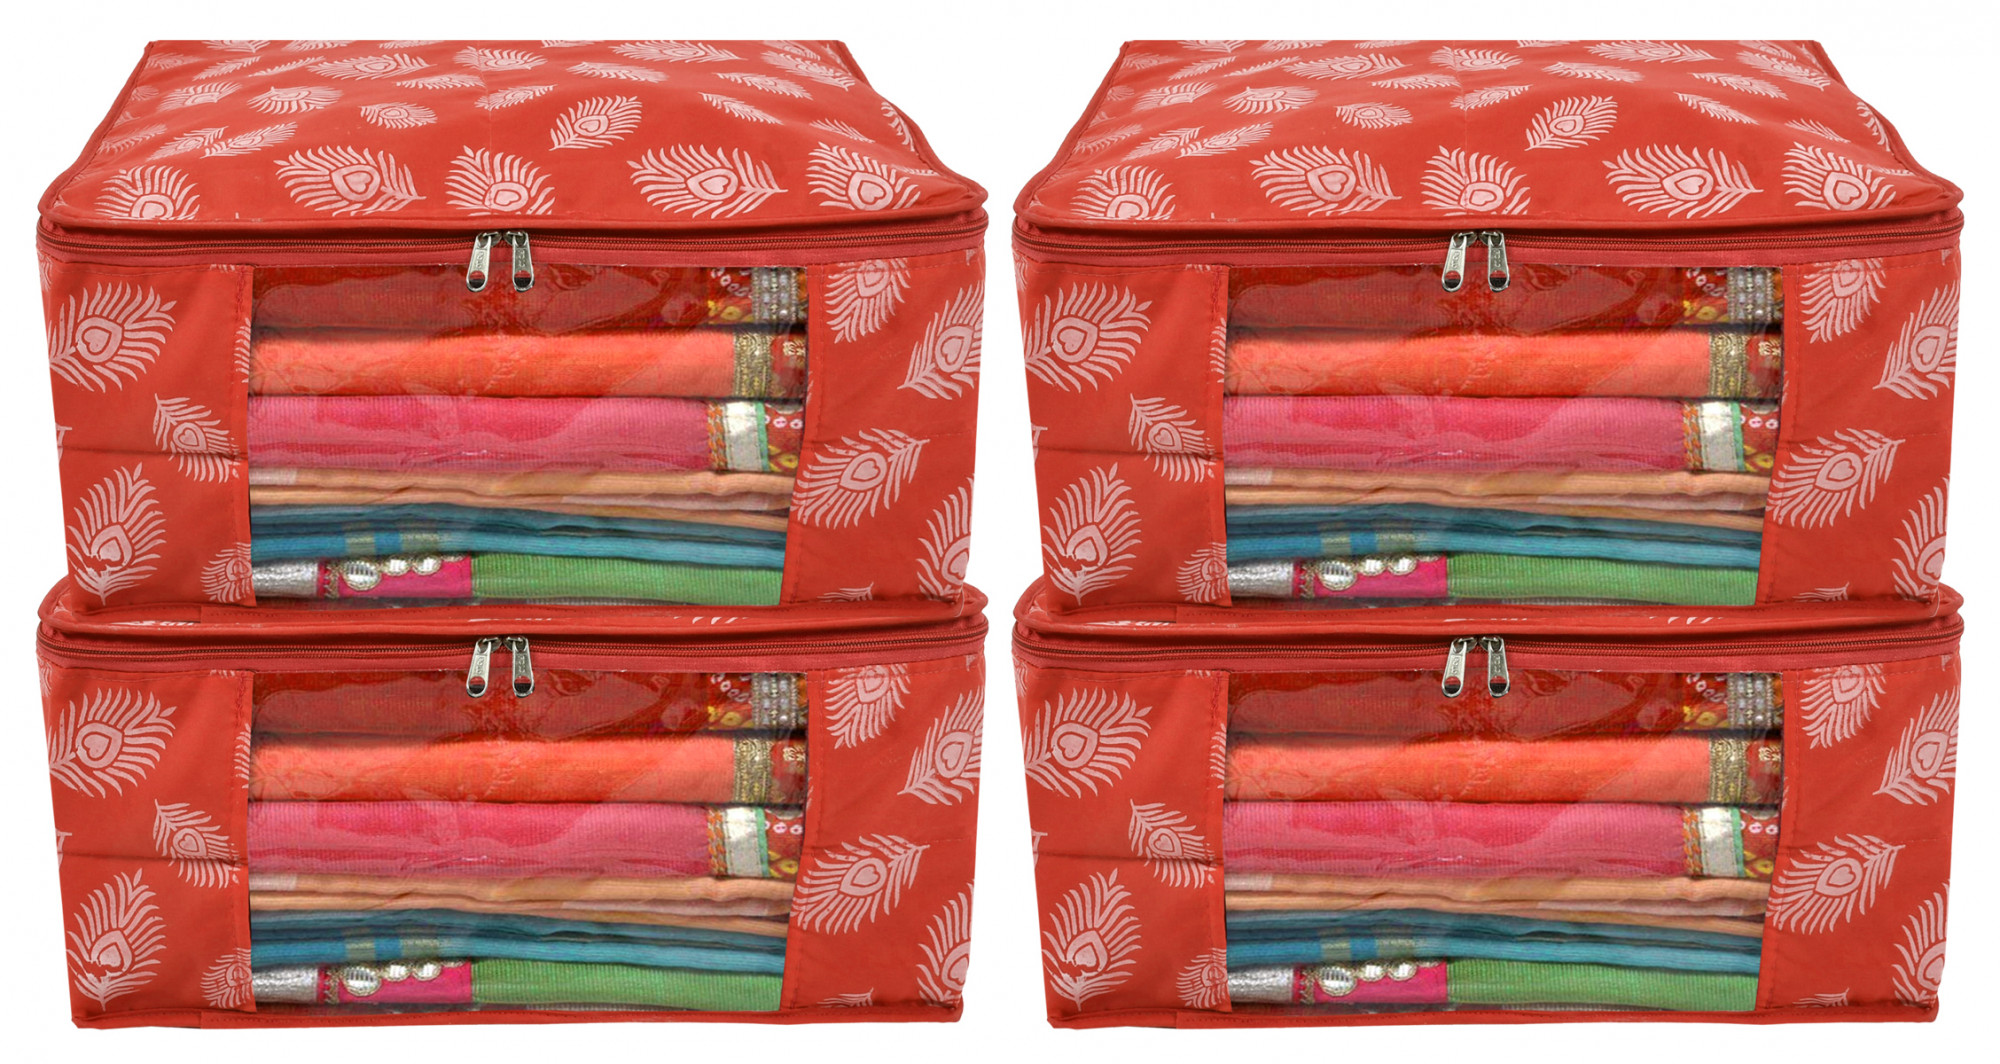 Kuber Industries Leaf Printed Saree Cover/Clothes Organiser For Wardrobe With Transparent Window,(Orange)